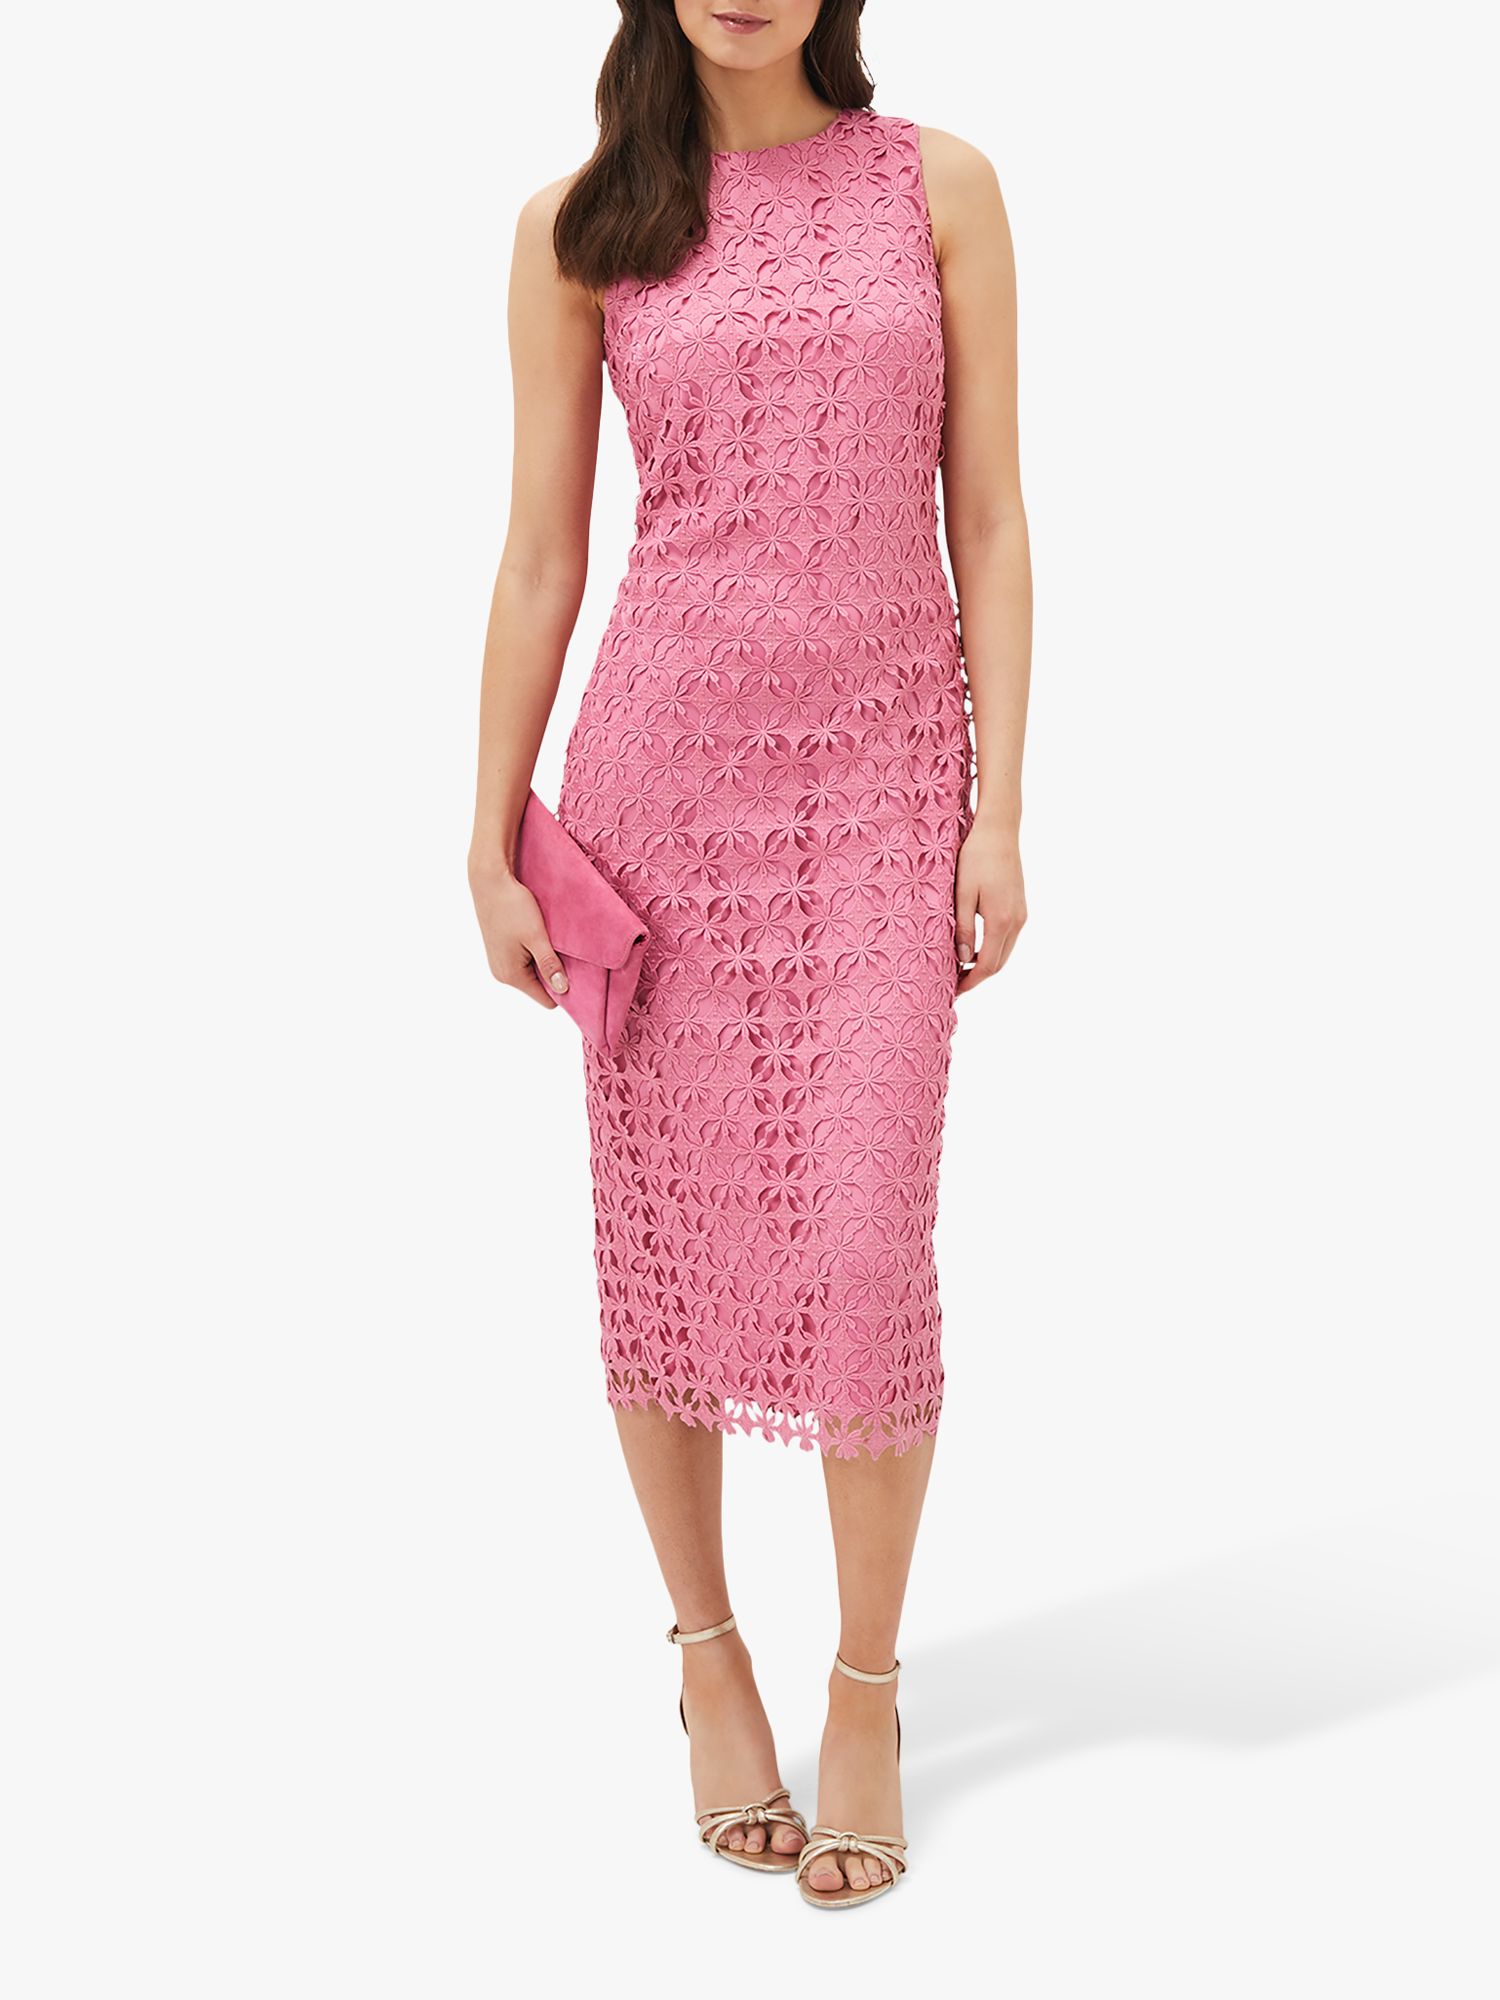 Phase Eight Novah Lace Midi Dress, Candy Pink, 20